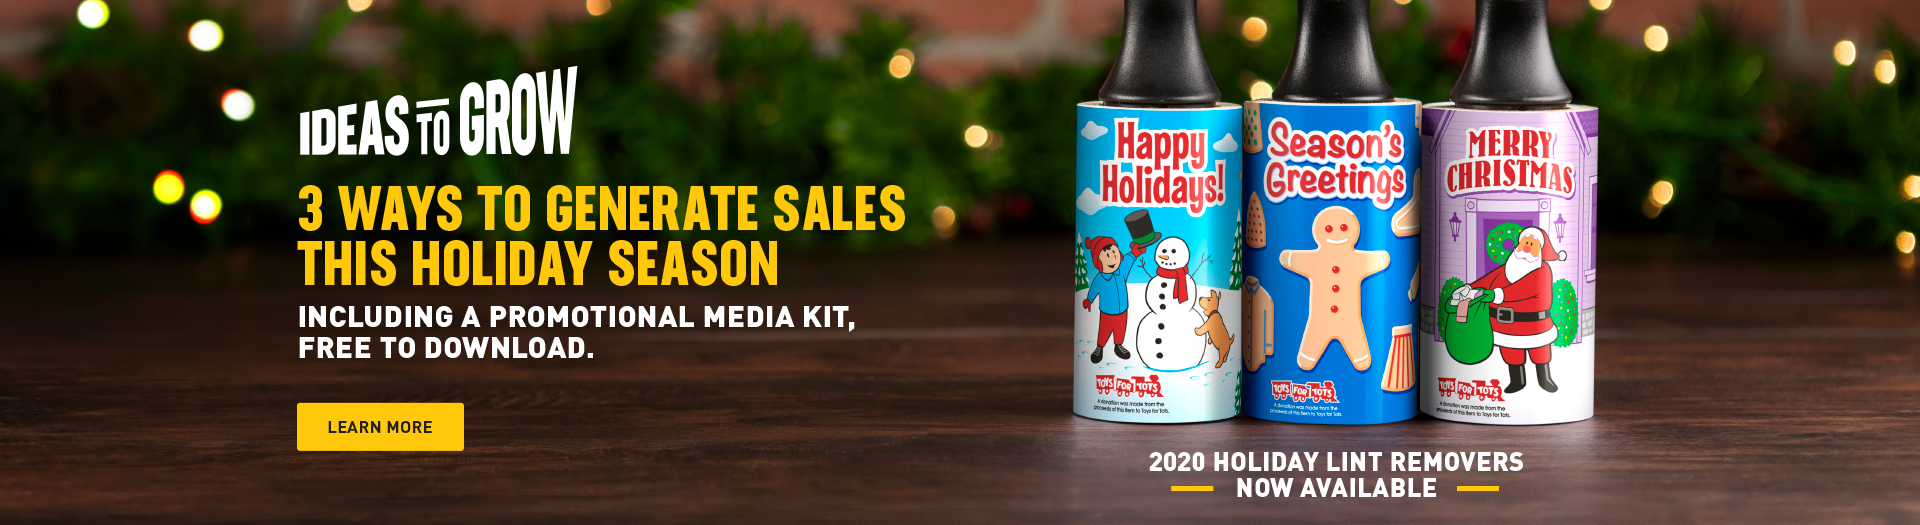 2020 Cleaner's Supply Holiday Lint Removers and Media Kit